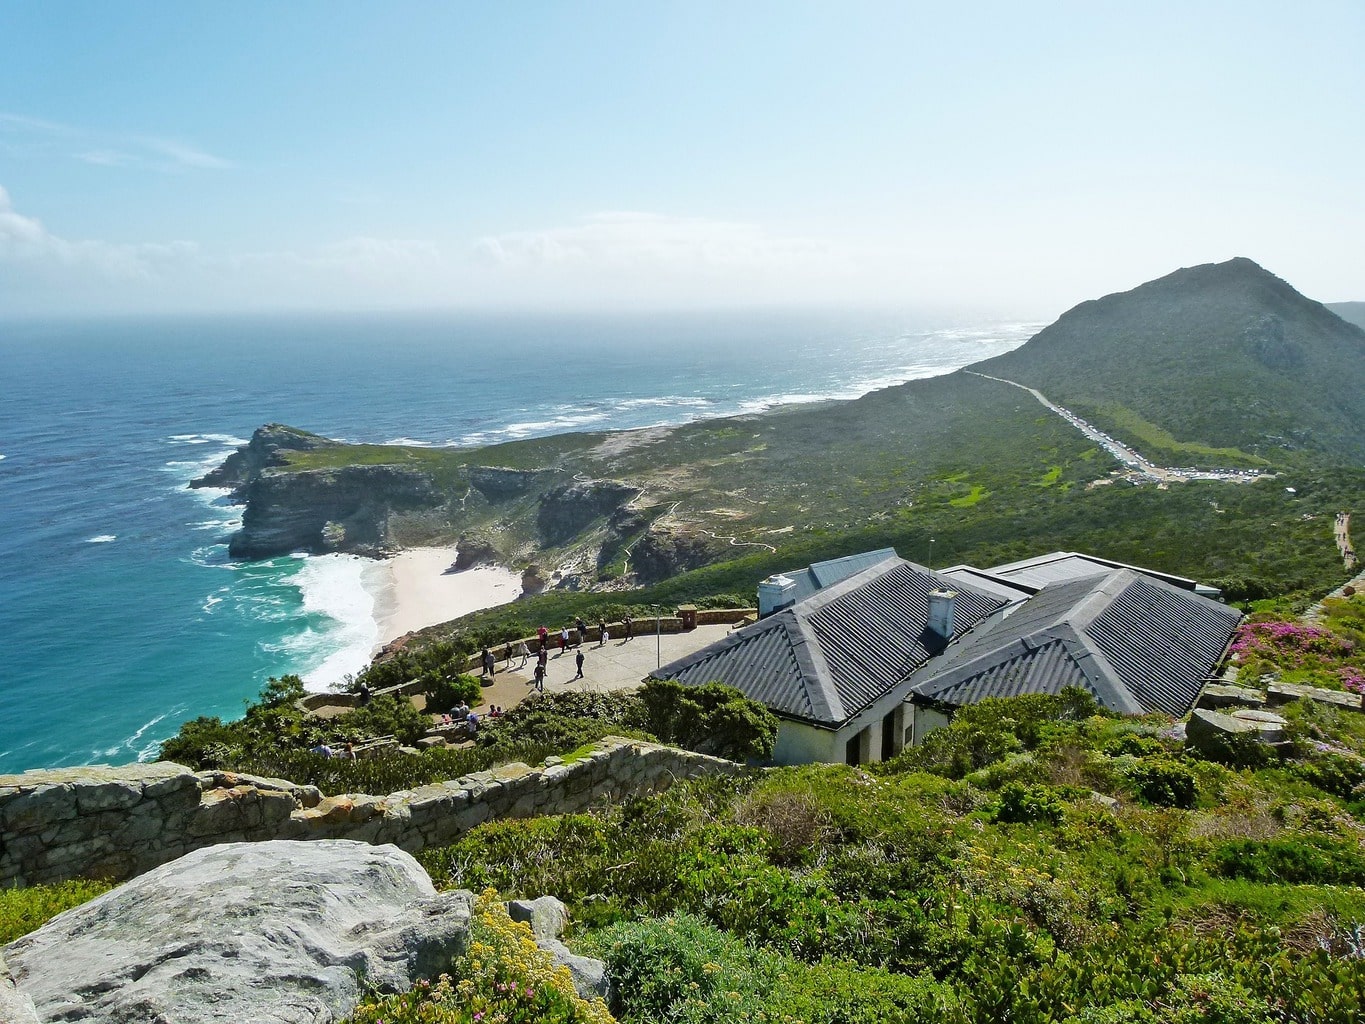 Cape of Good Hope Nature Reserve